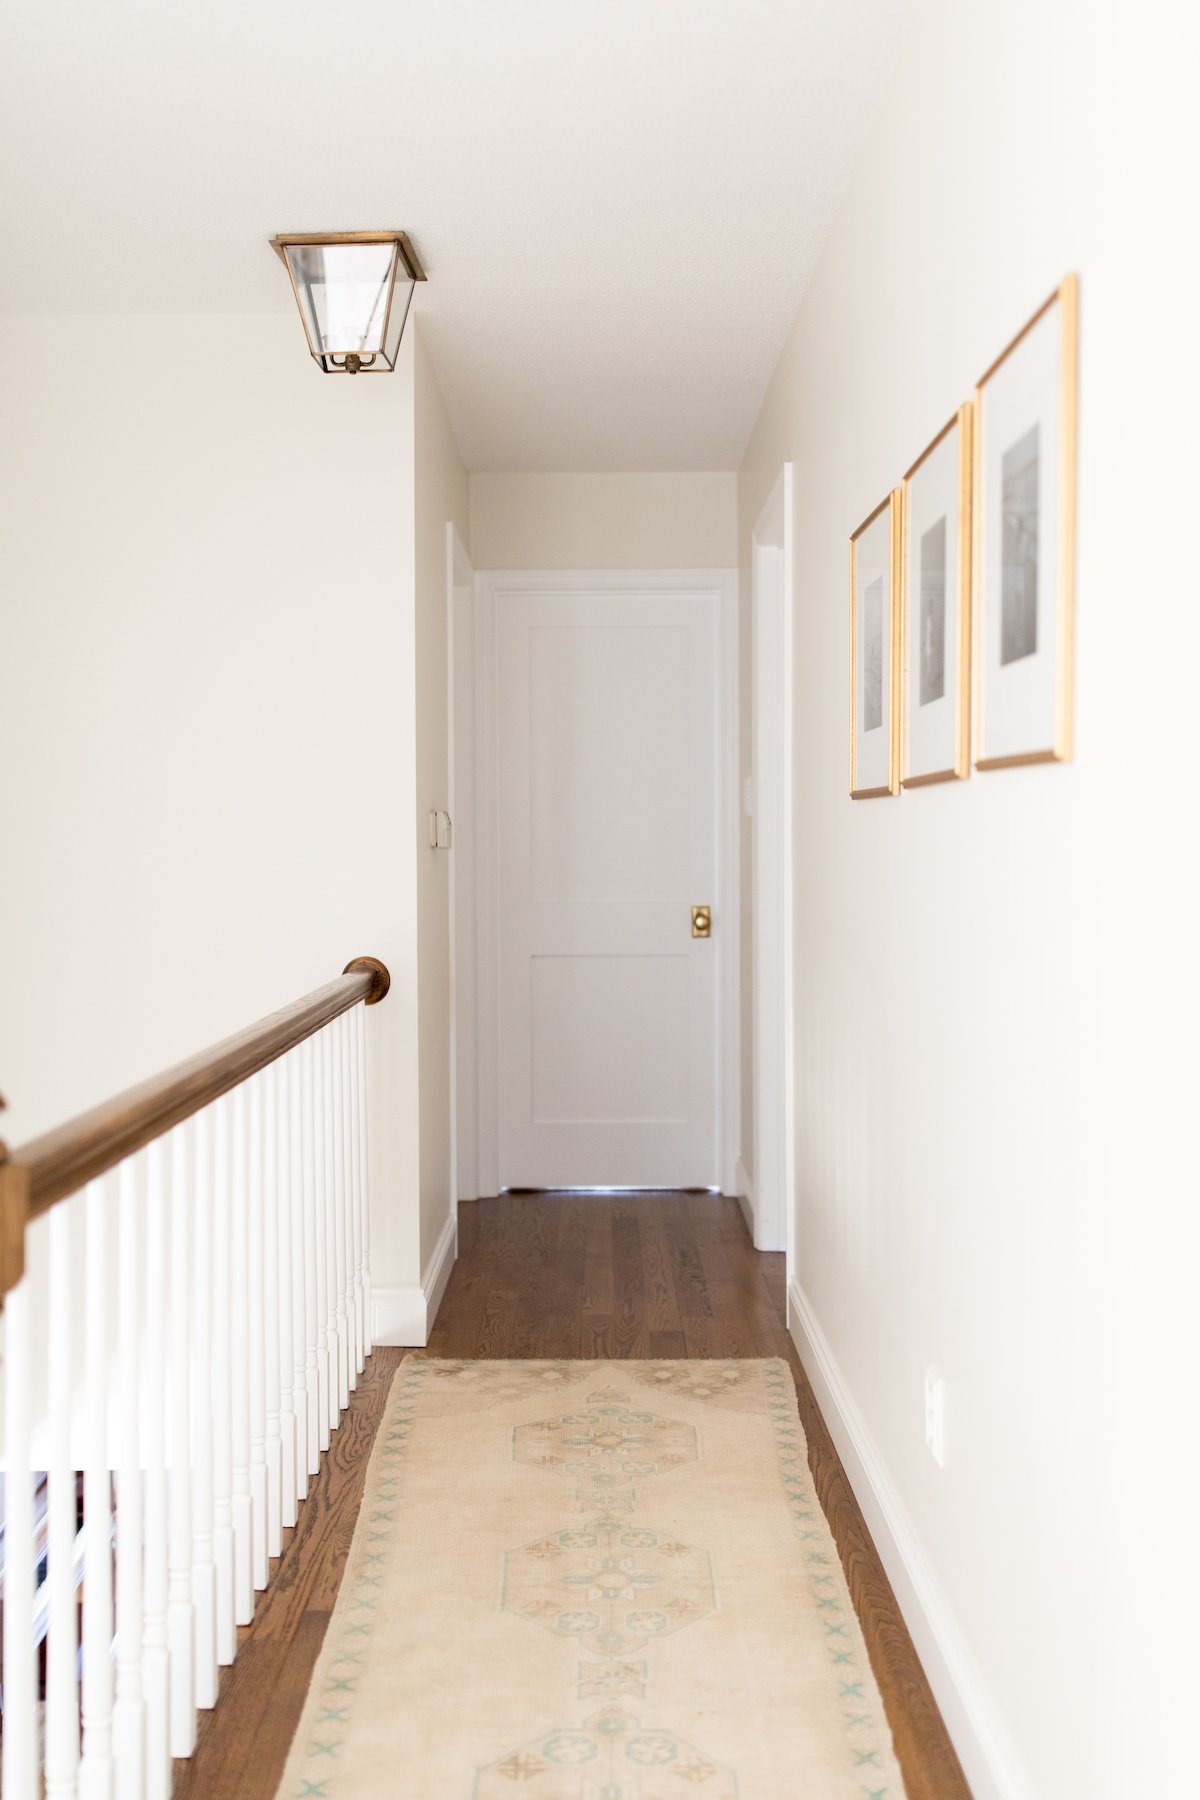 A hallway with white walls, wood floors and flush mount lanterns in a brass finish.